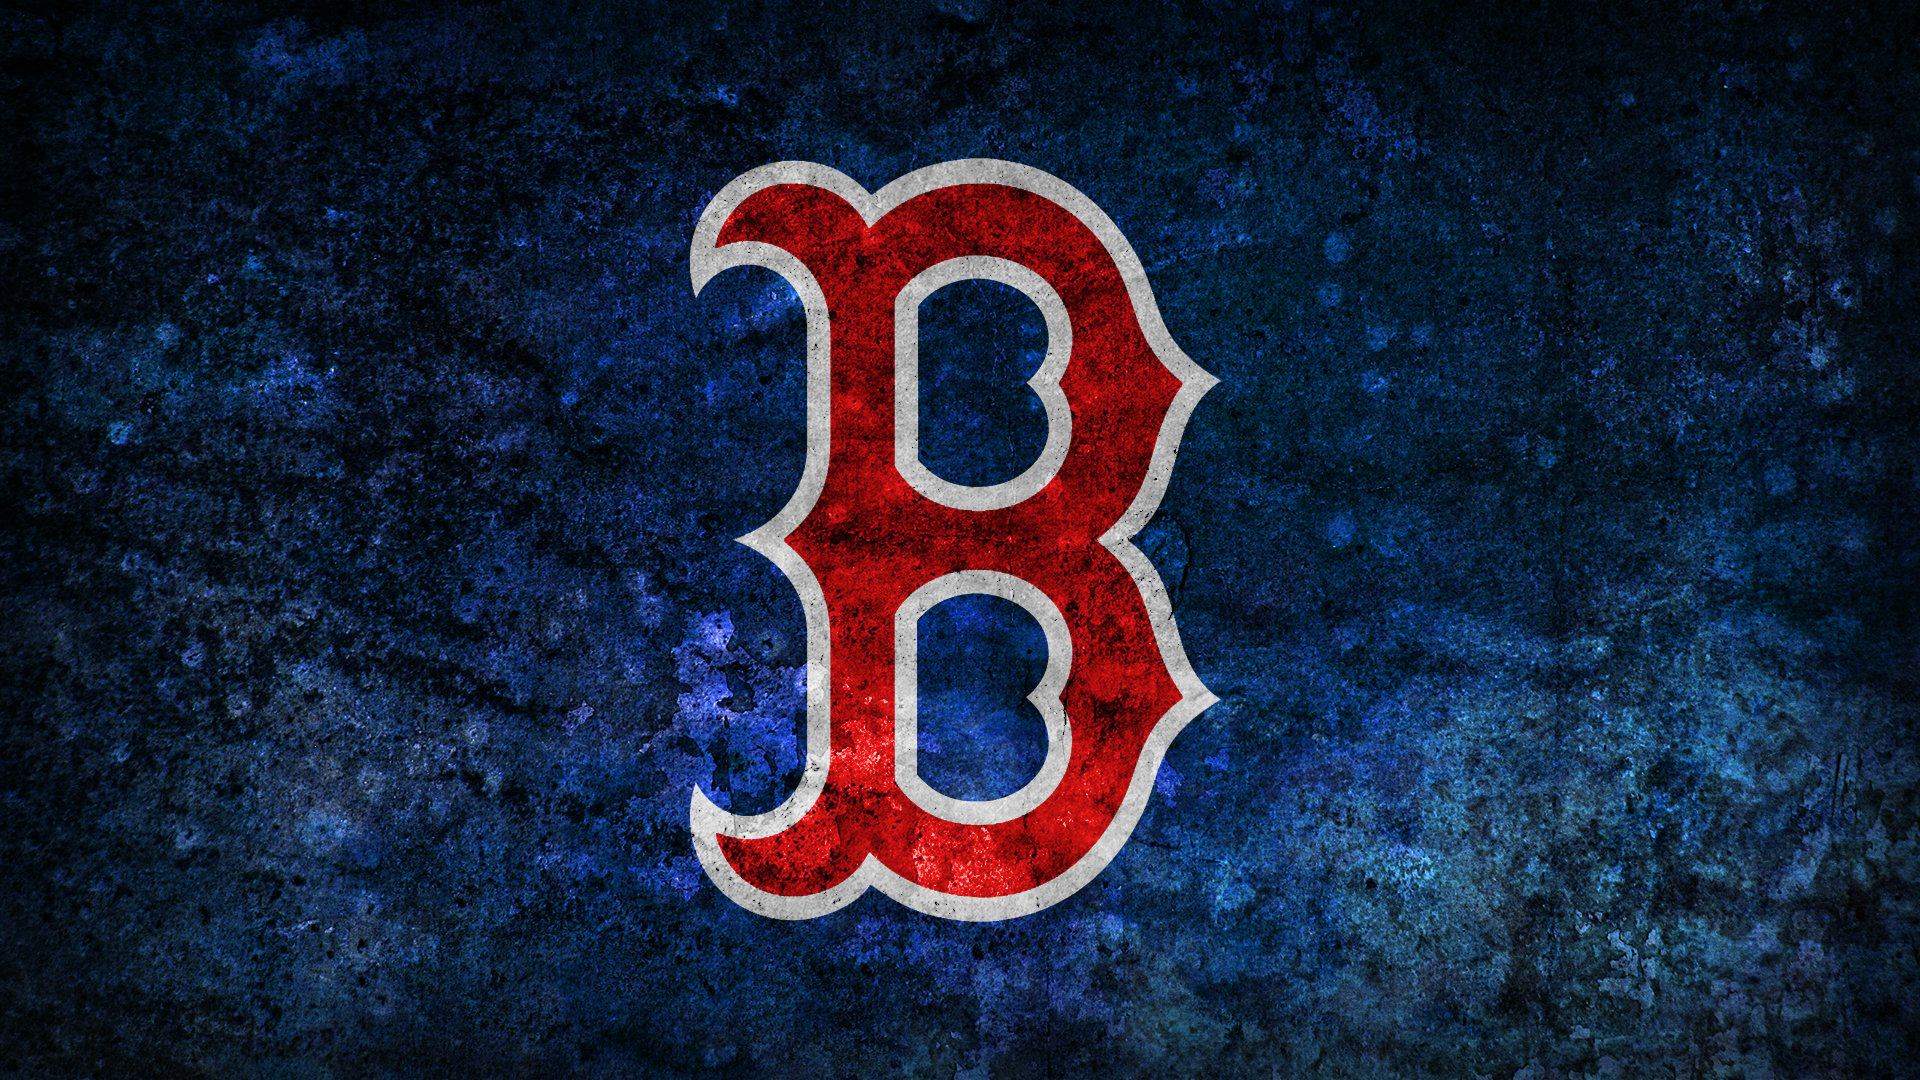 Boston Red Sox Backgrounds Download 1920x1080